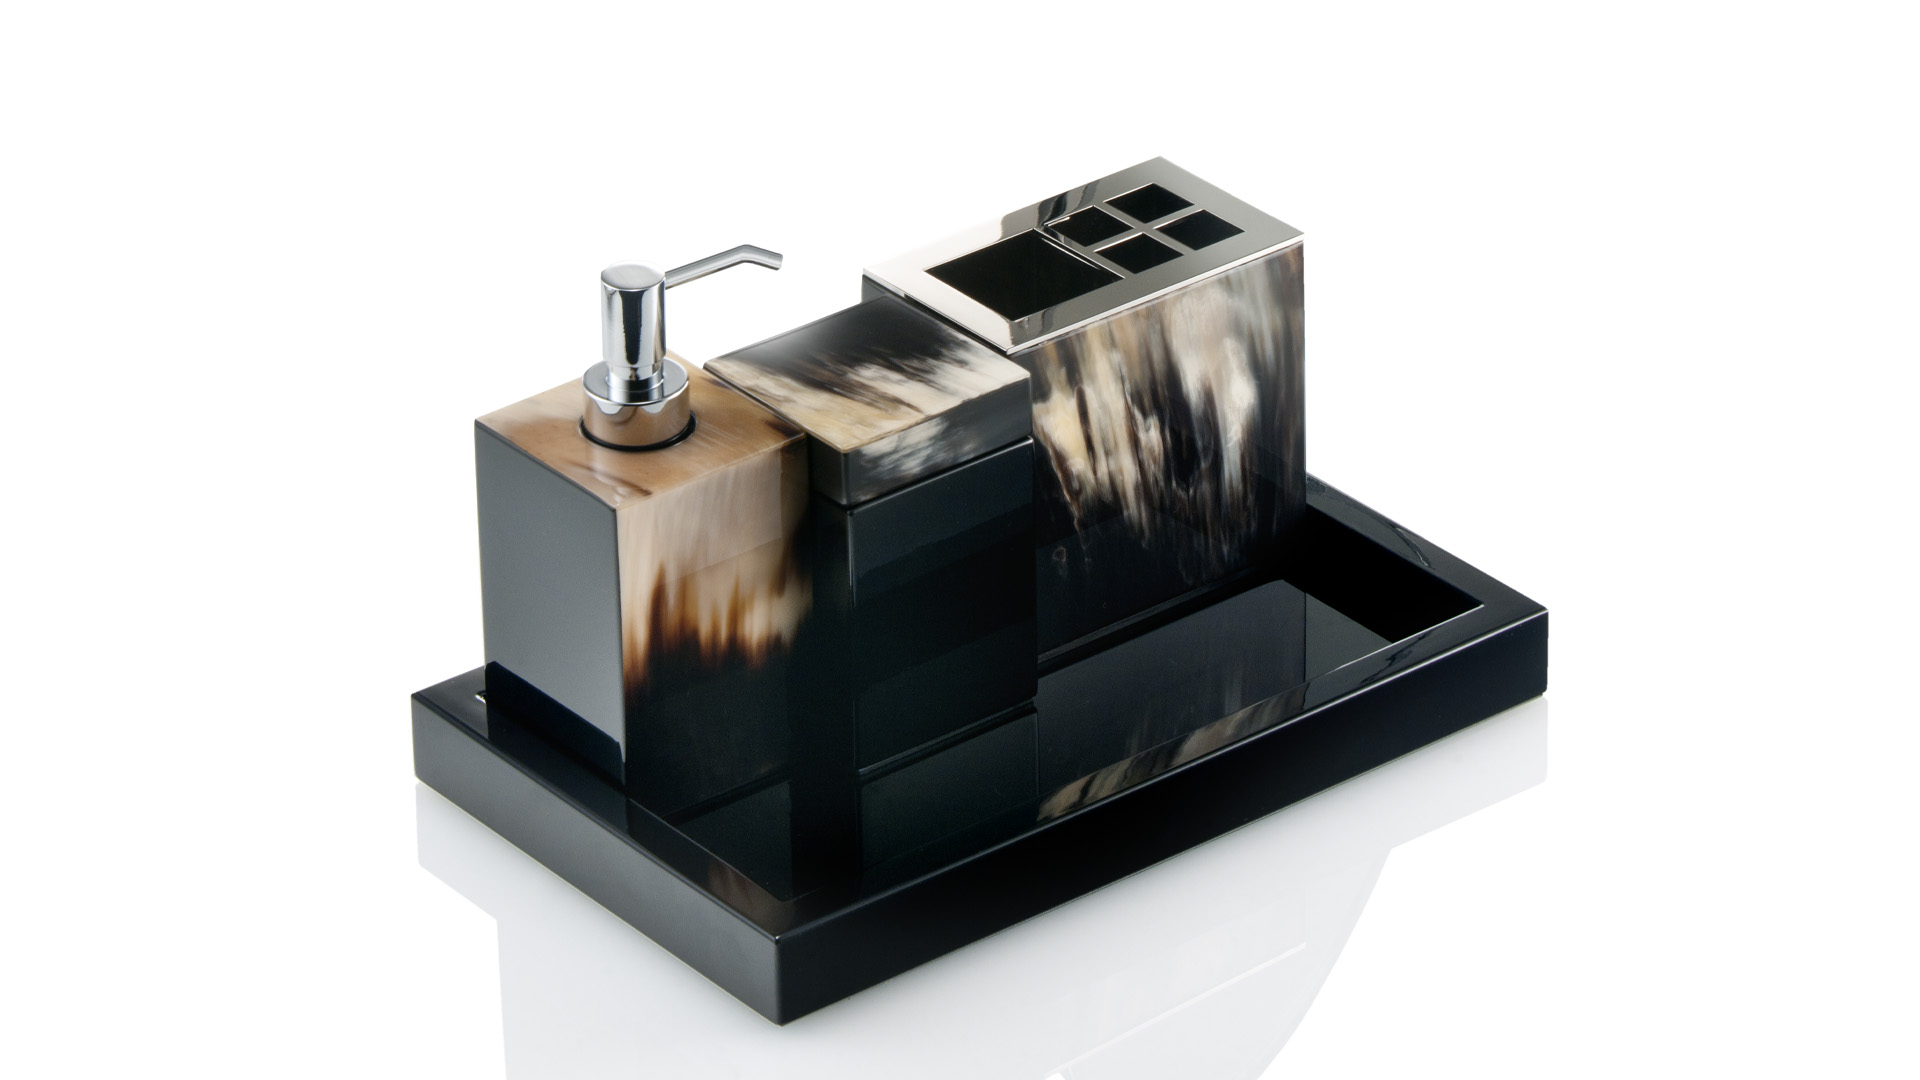 Bath sets - Iris bath set in horn and glossy black lacquered wood - cover - Arcahorn